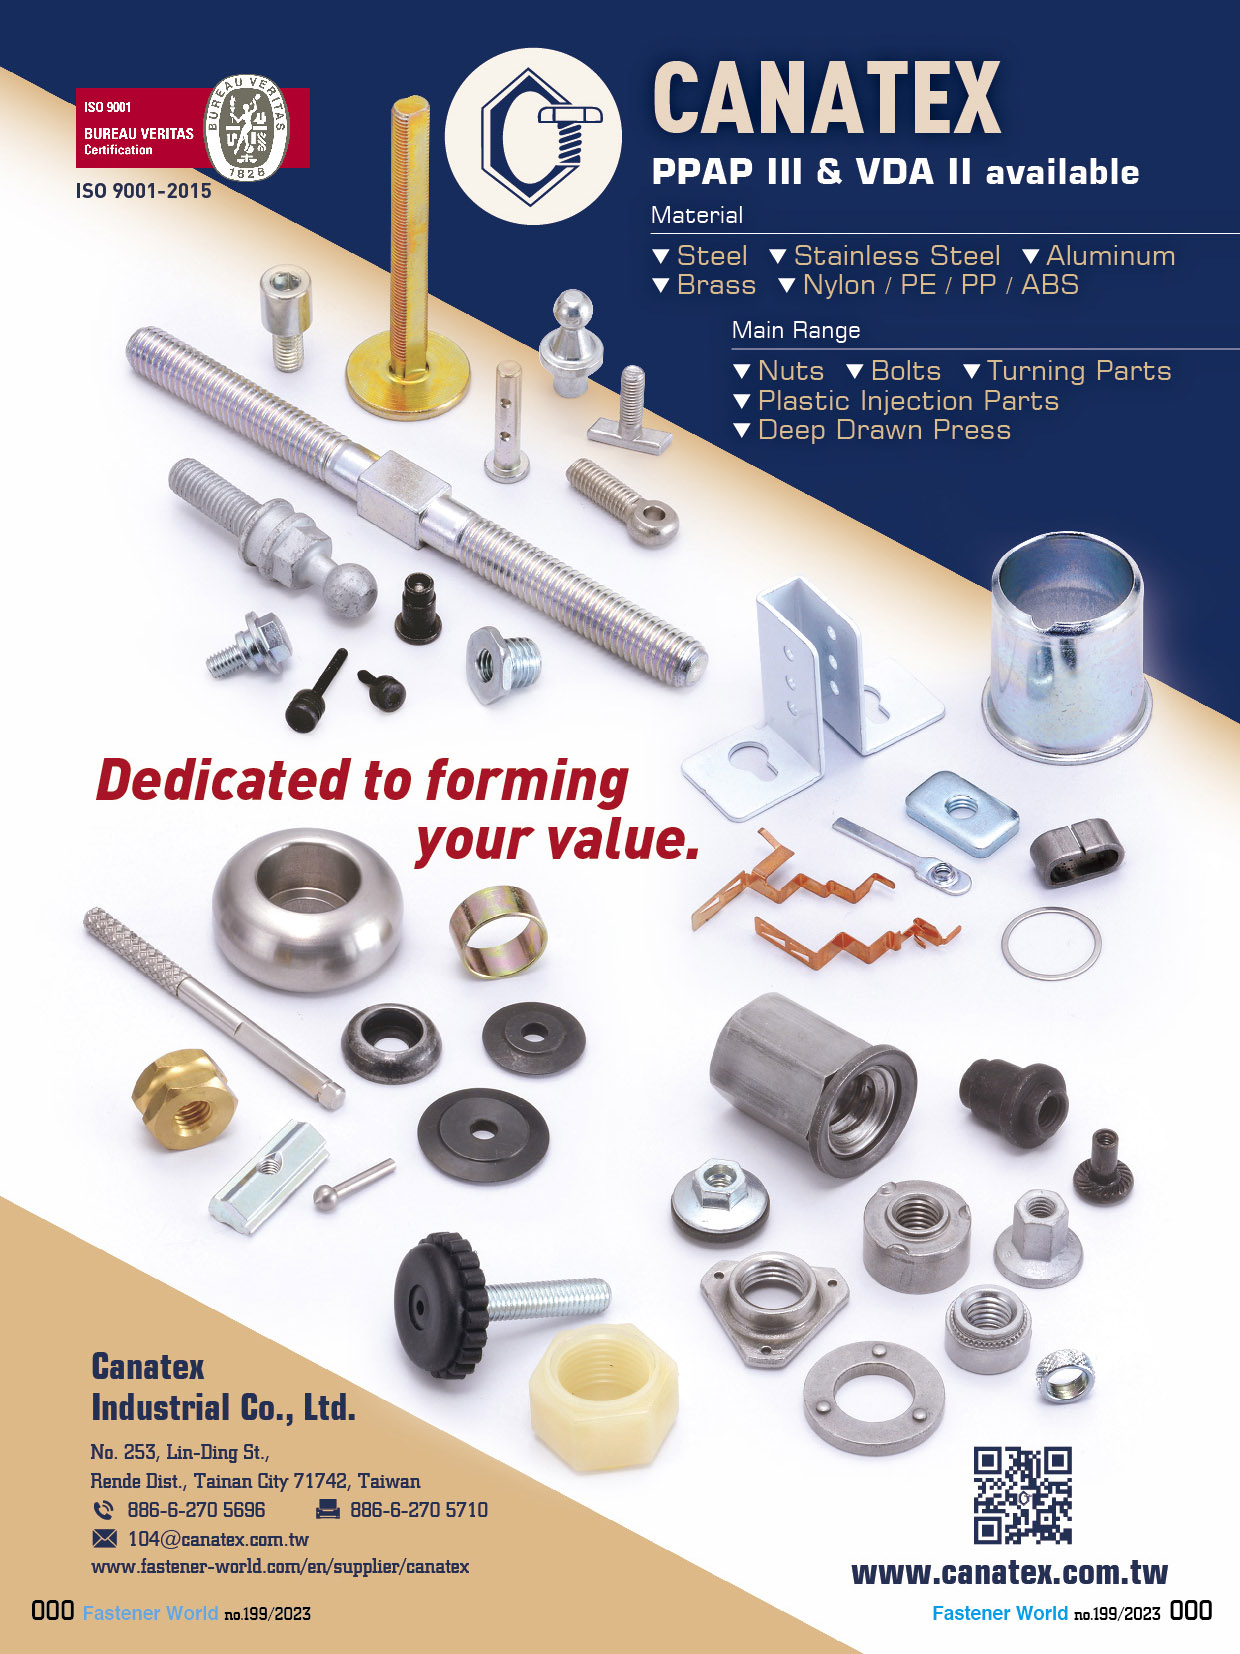 CANATEX INDUSTRIAL CO., LTD. , Nuts, Bolts, Turning Parts, Deep Drawn Press, Plastic Injection Parts